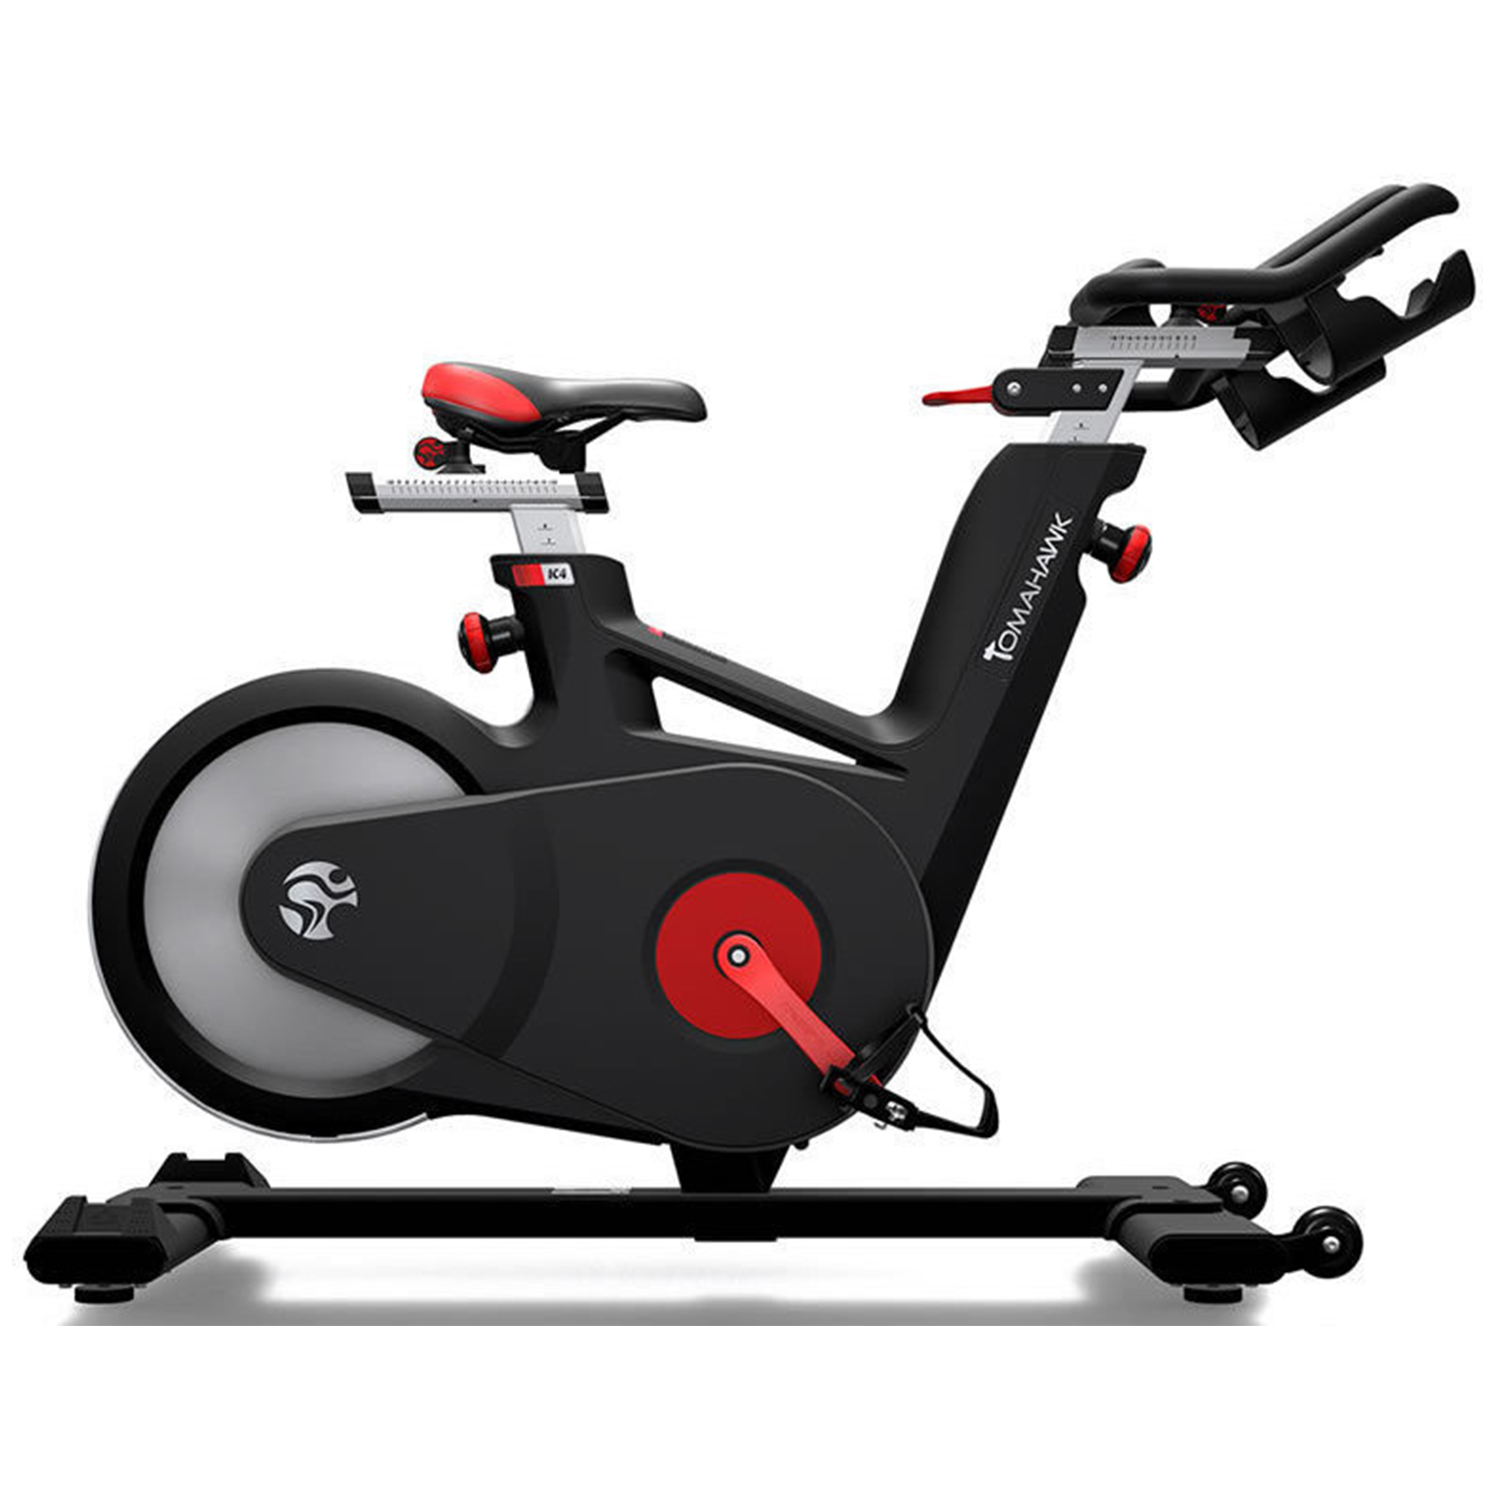 Køb professionel spinningcykel - - CK Fitness cardioudstyr